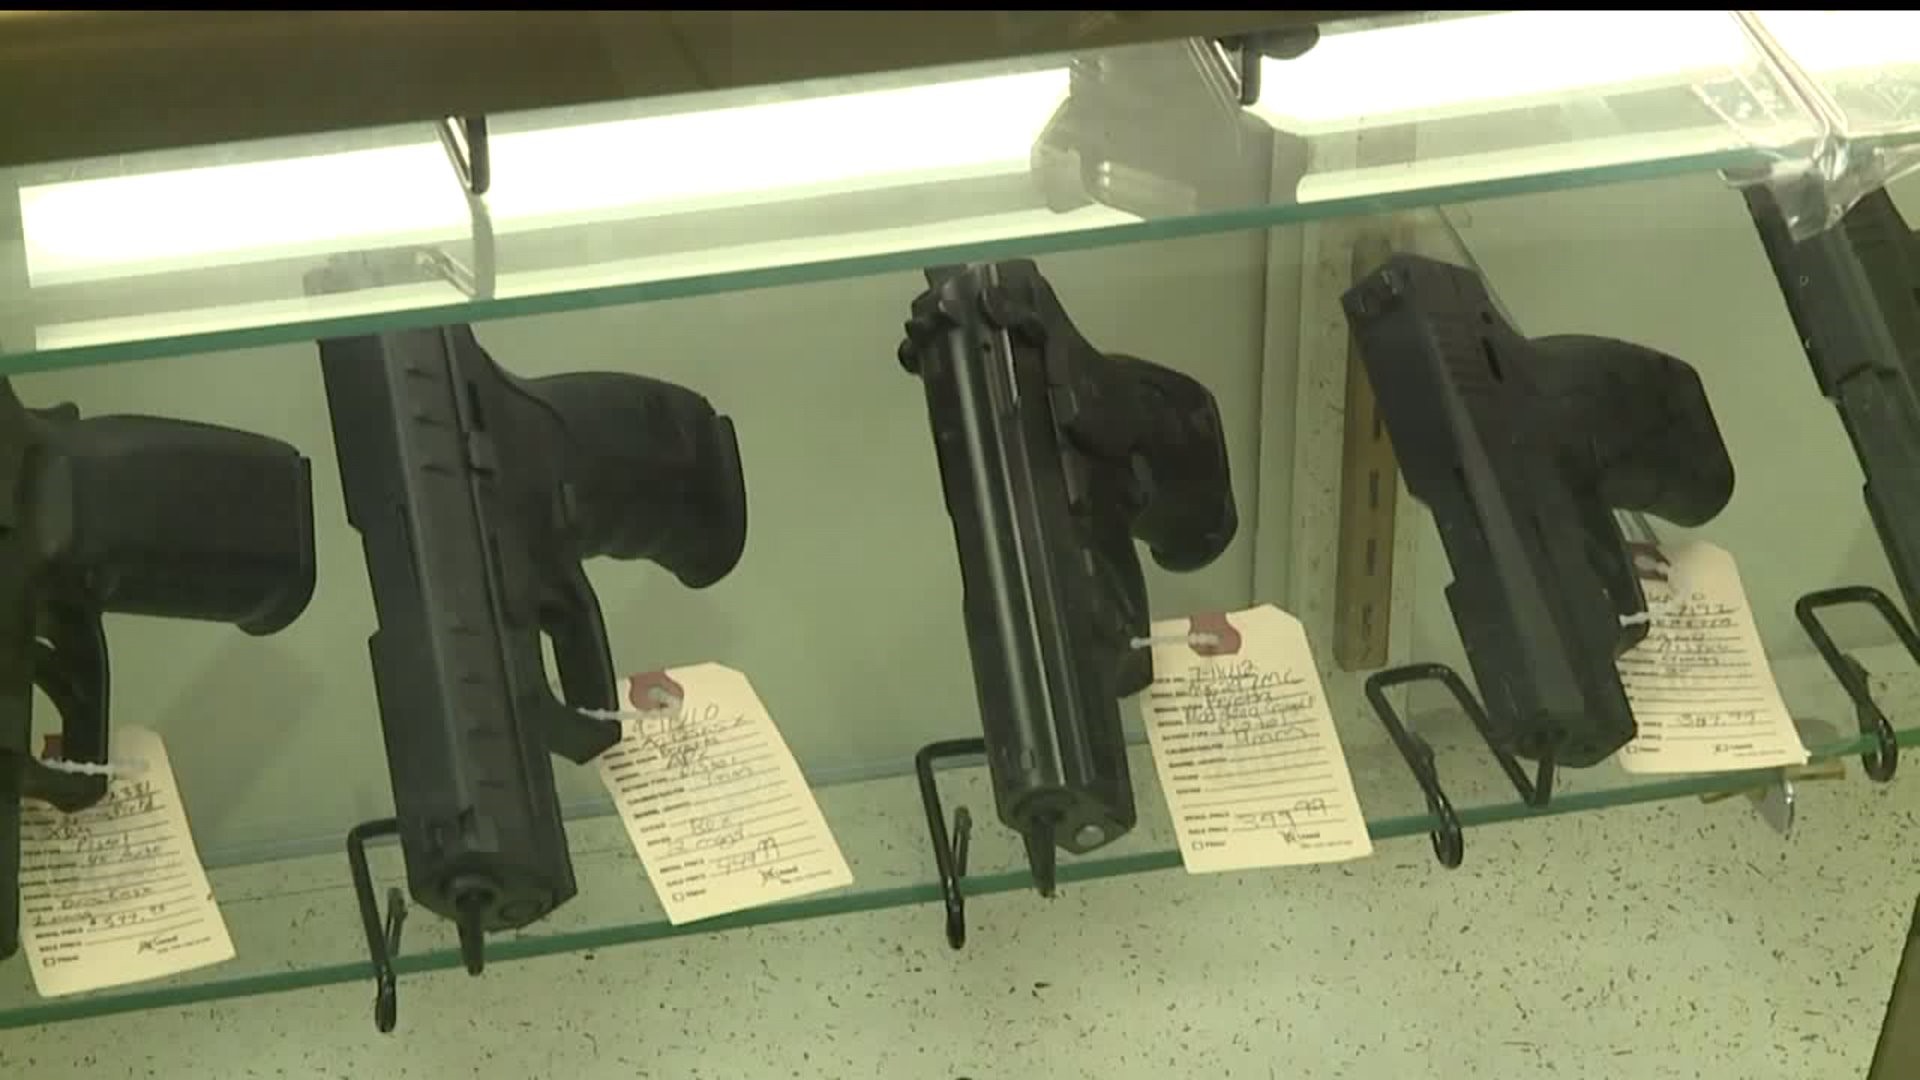 Attorney General Josh Shapiro says 80 receivers are firearms